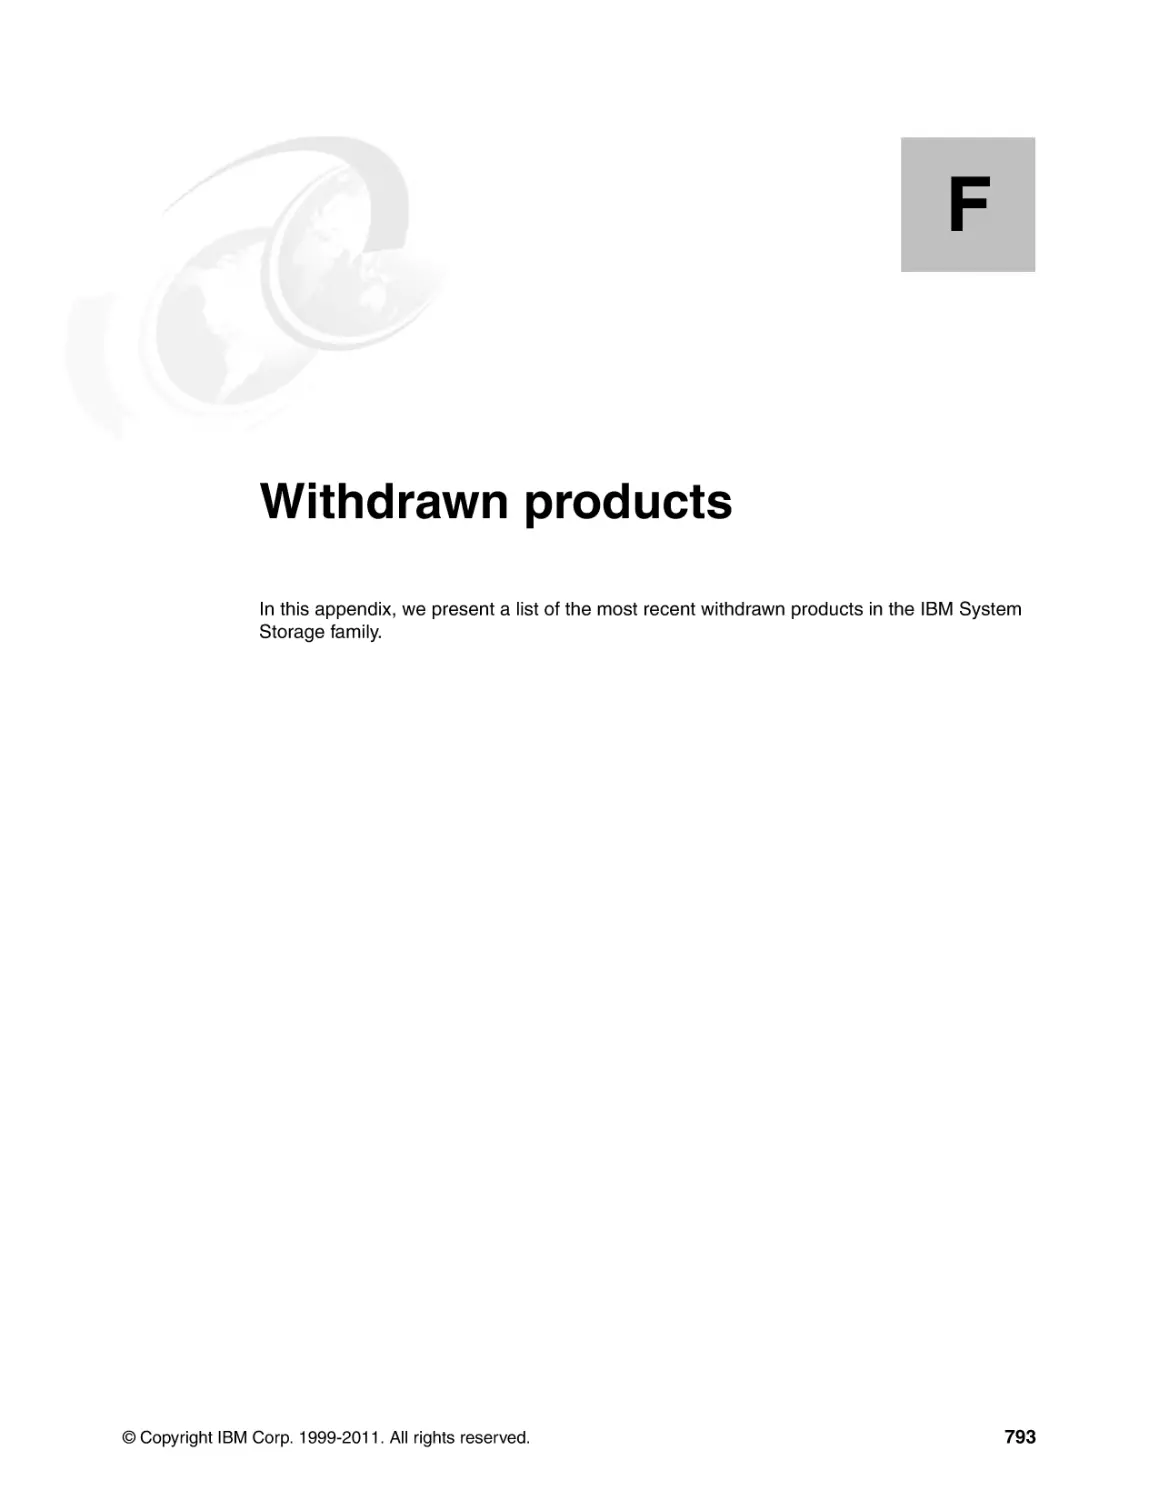 Appendix F. Withdrawn products